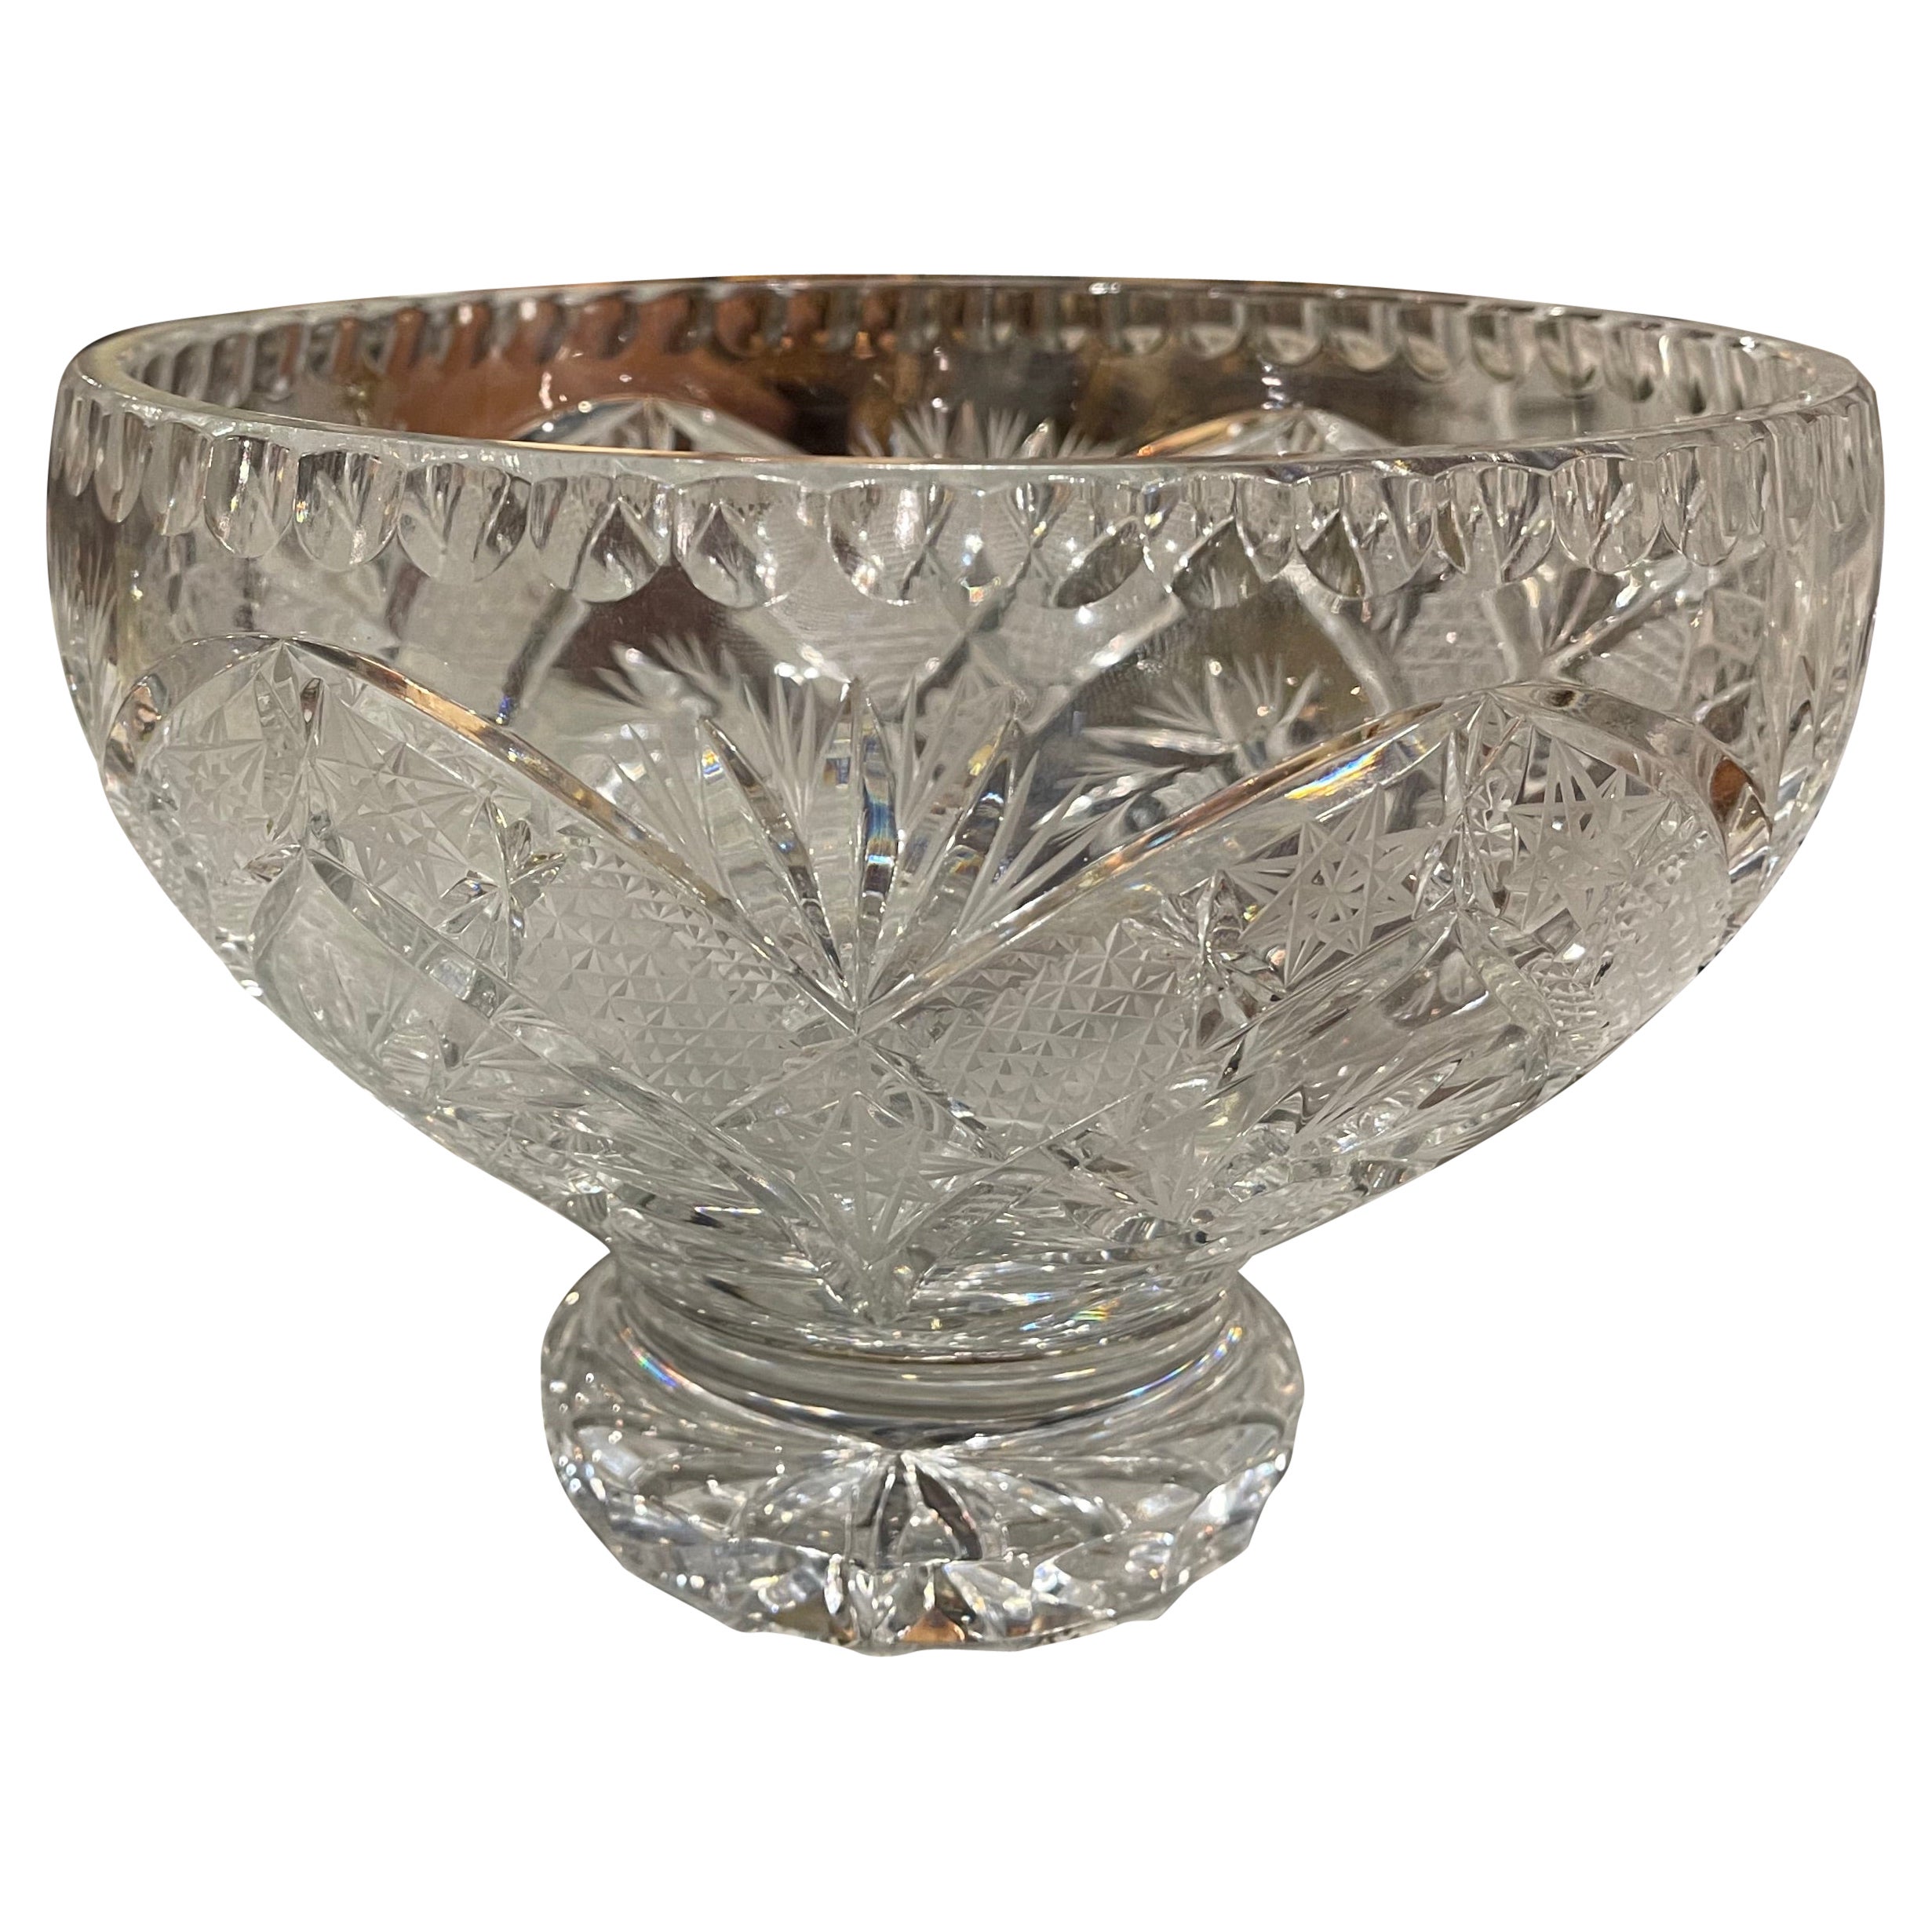 Midcentury French Cut Glass Crystal Decorative Compote Centerpiece Bowl For Sale